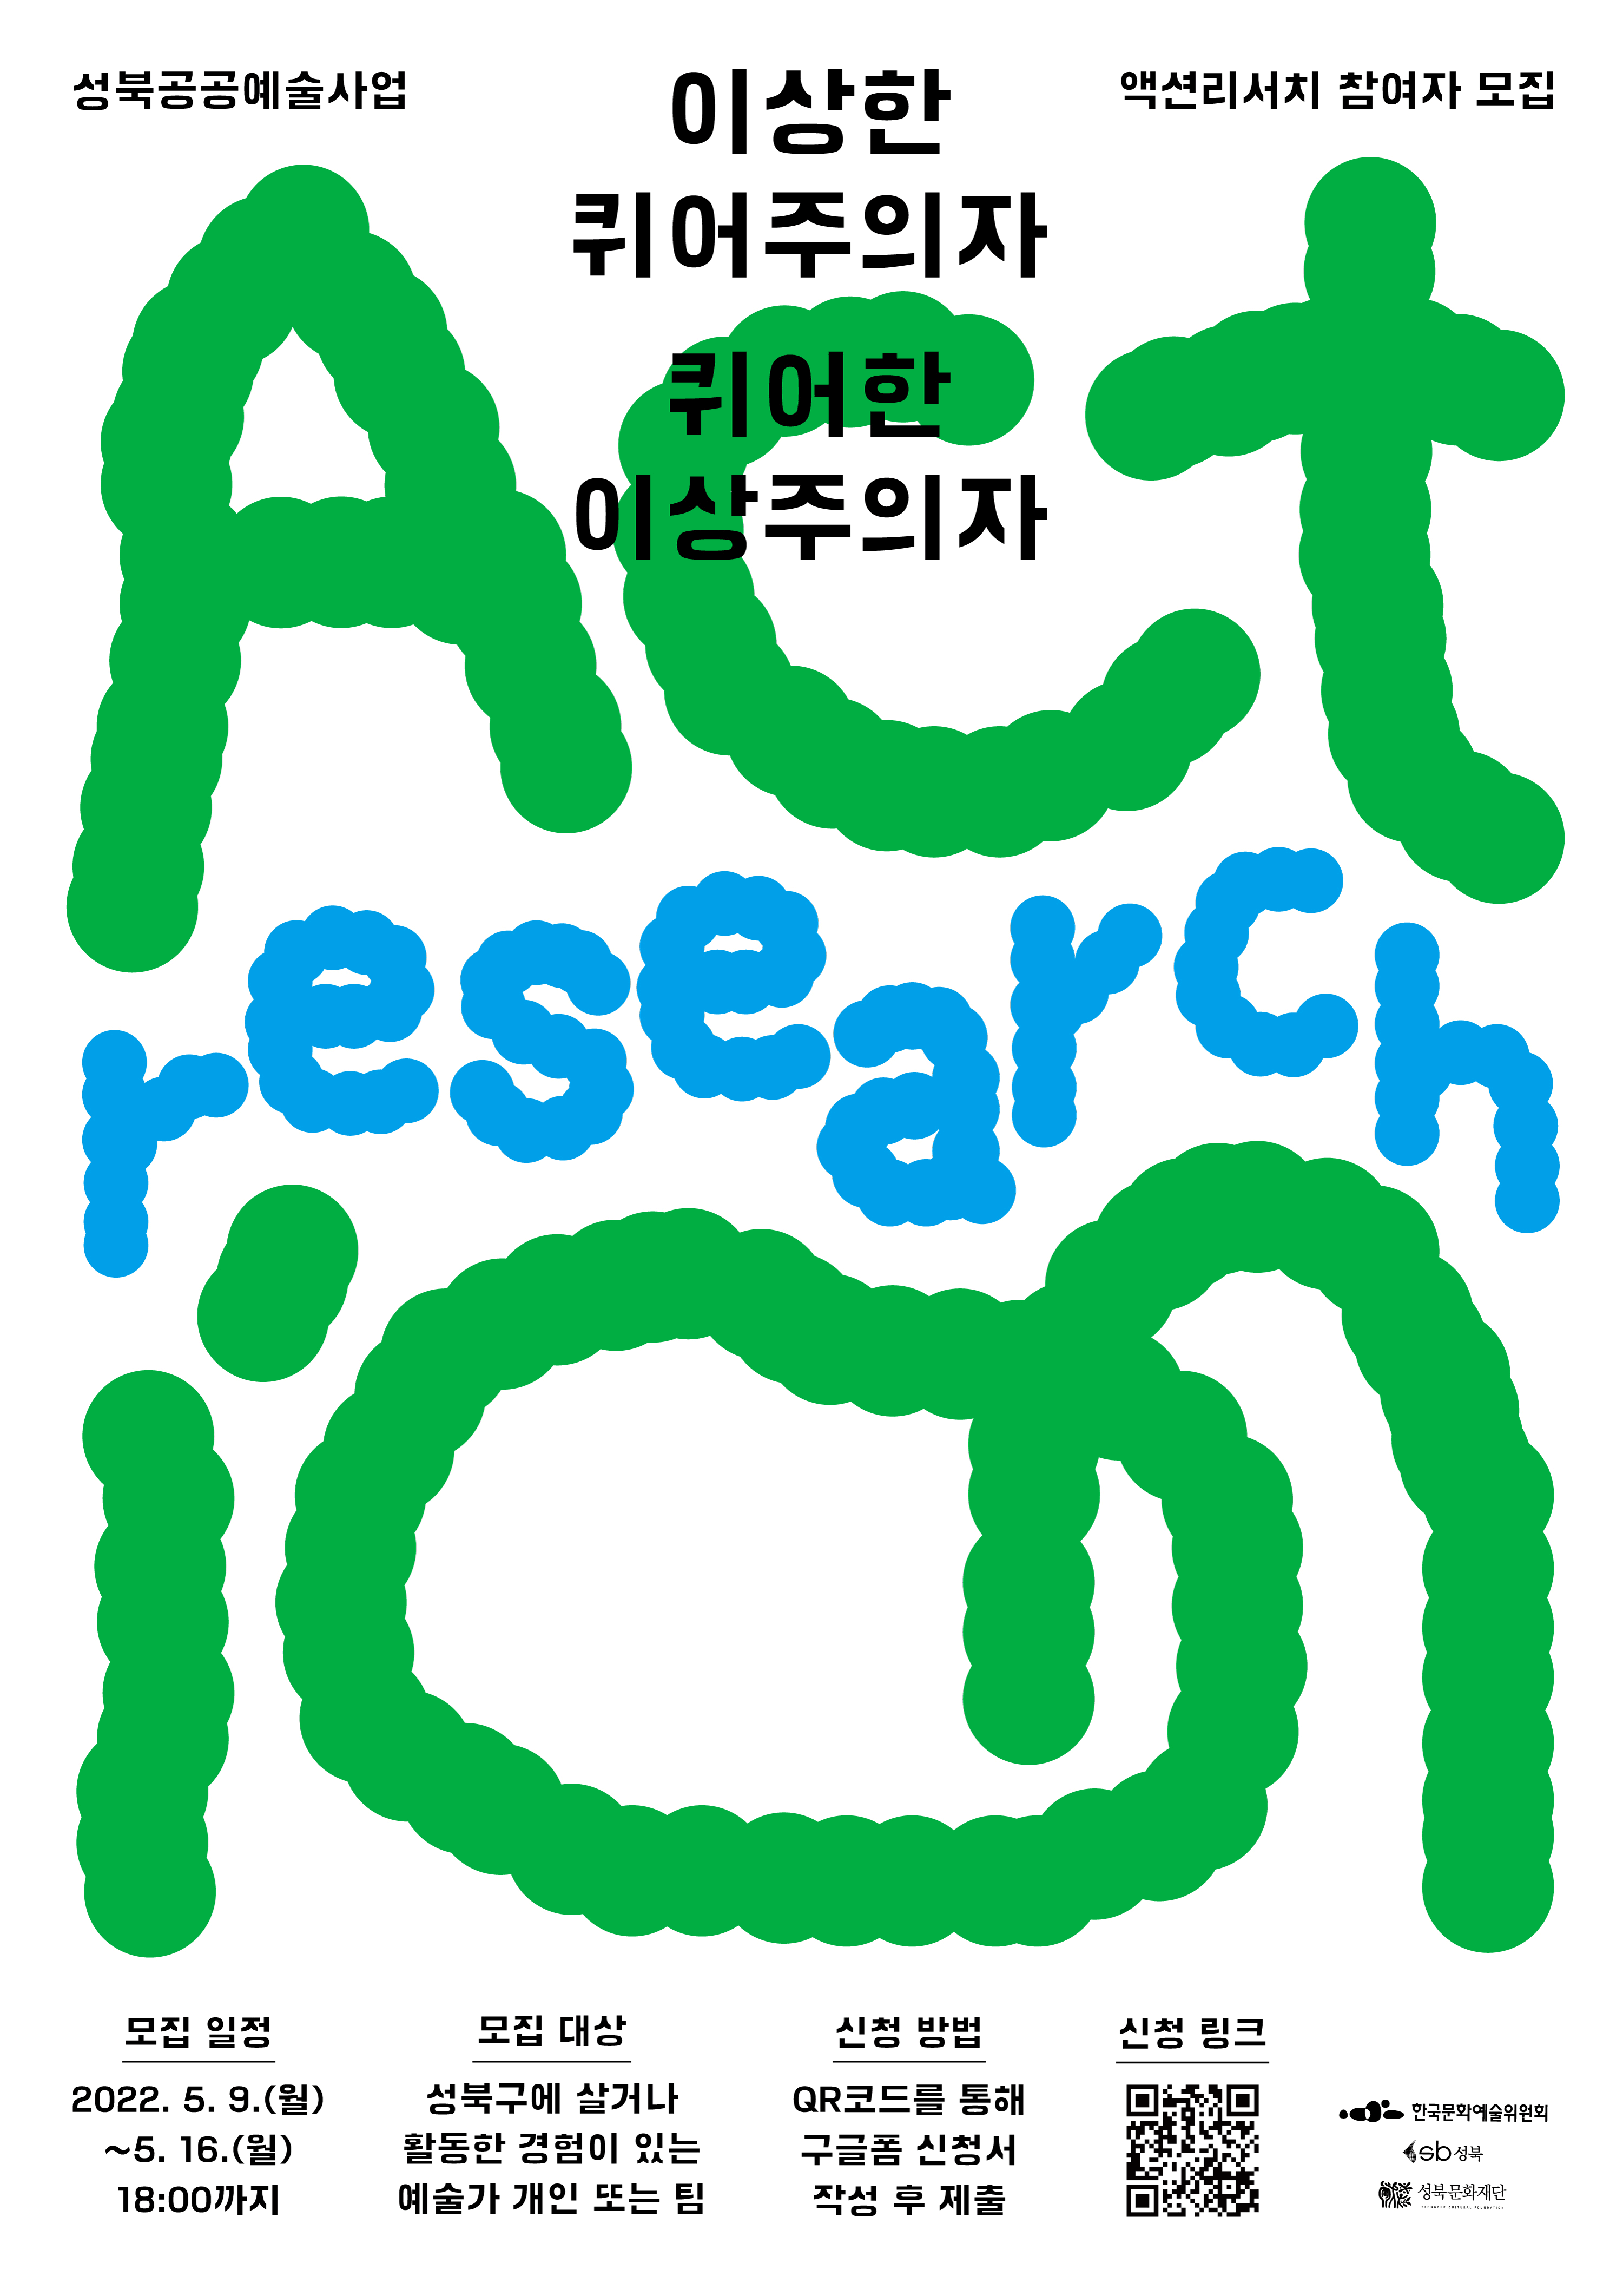 3._action_research_ideal_queerlist_queer_idealist_copyright__haeji_jeong_2.gif